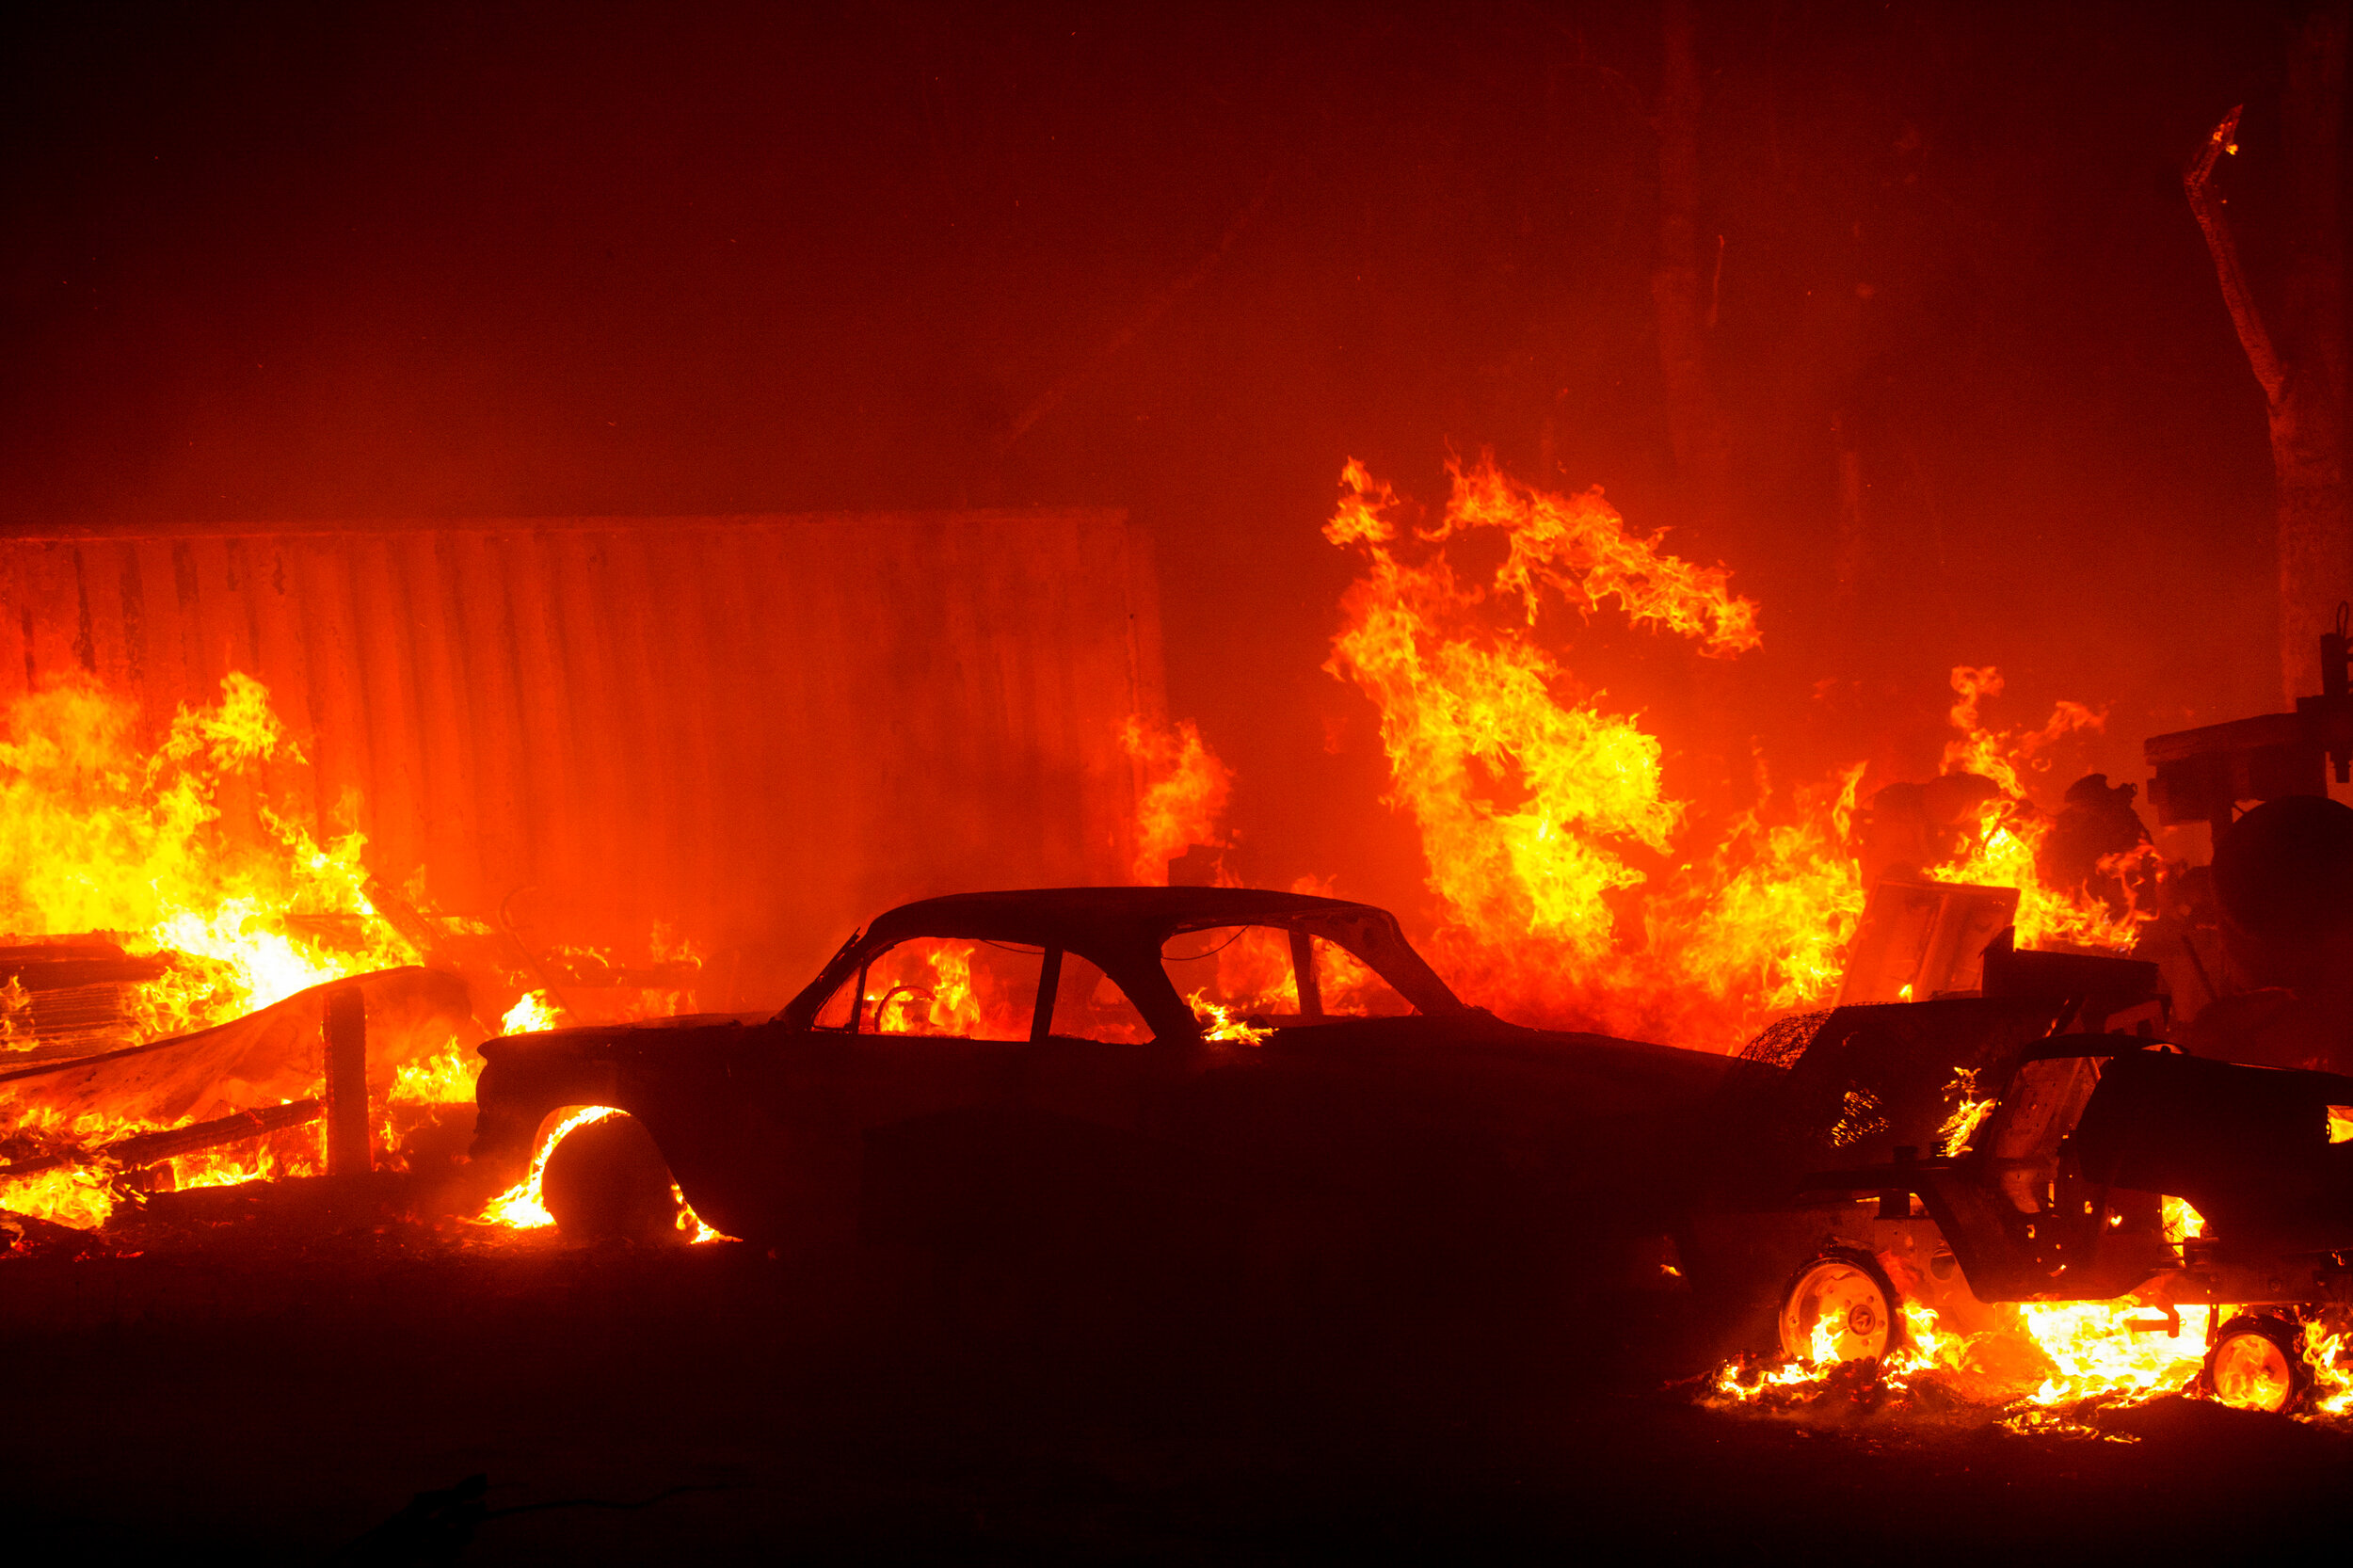  The Lake Fire burns a vehicle near Lake Hughes  in the Angeles National Forest on Wednesday, Aug. 12, 2020, north of Los Angeles. The 2020 California wildfire season was characterized by a record-setting year of wildfires that burned across the stat